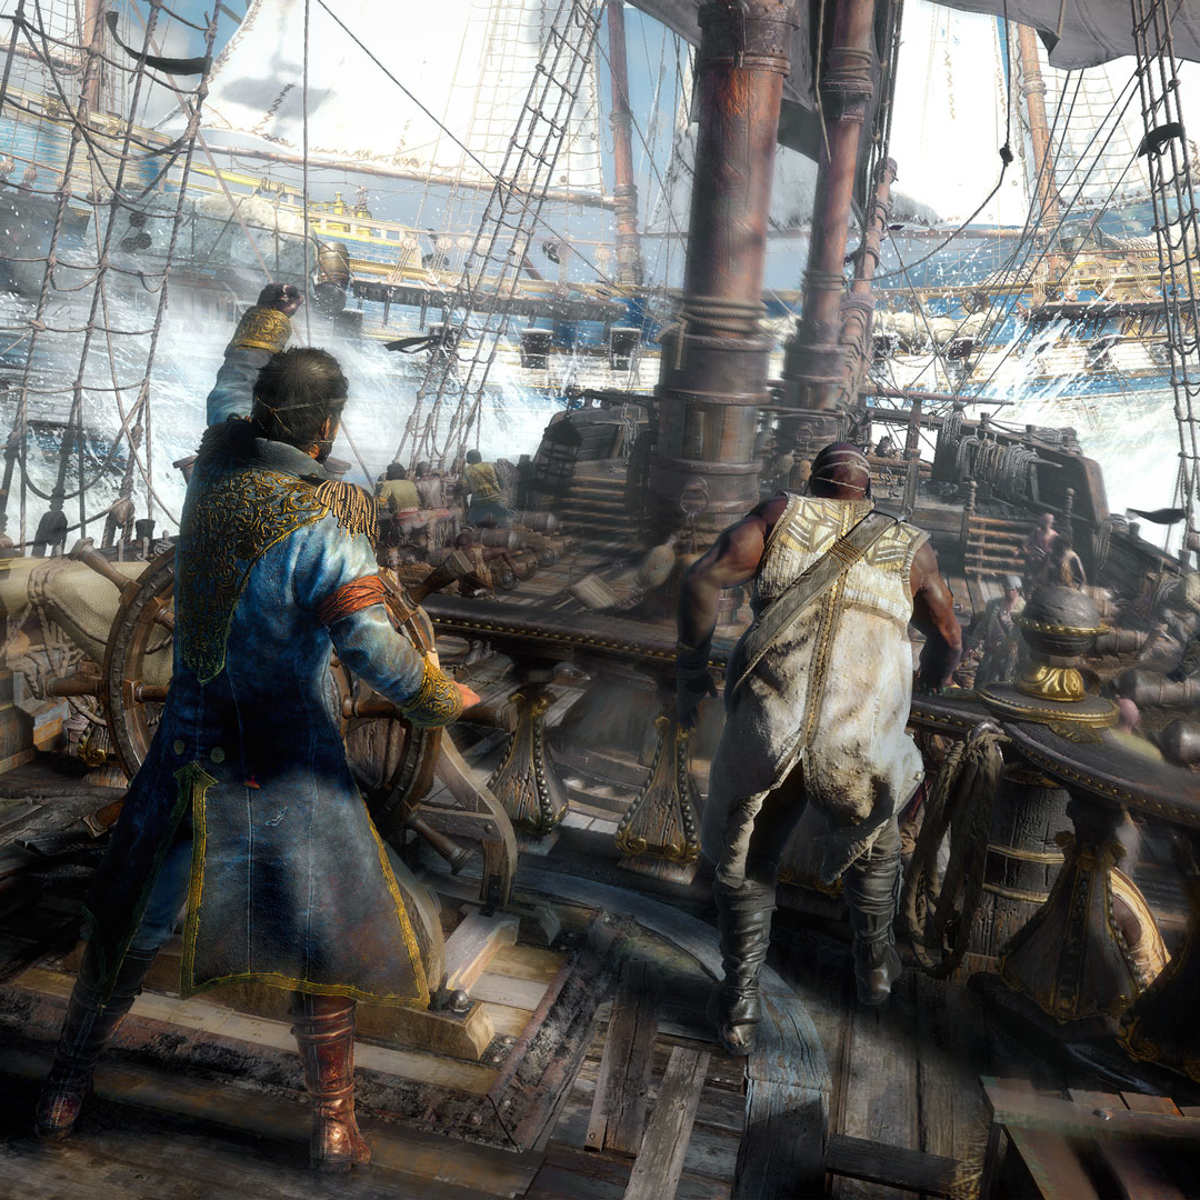 Skull & Bones has now been rated by ESRB, hinting at a release date soon